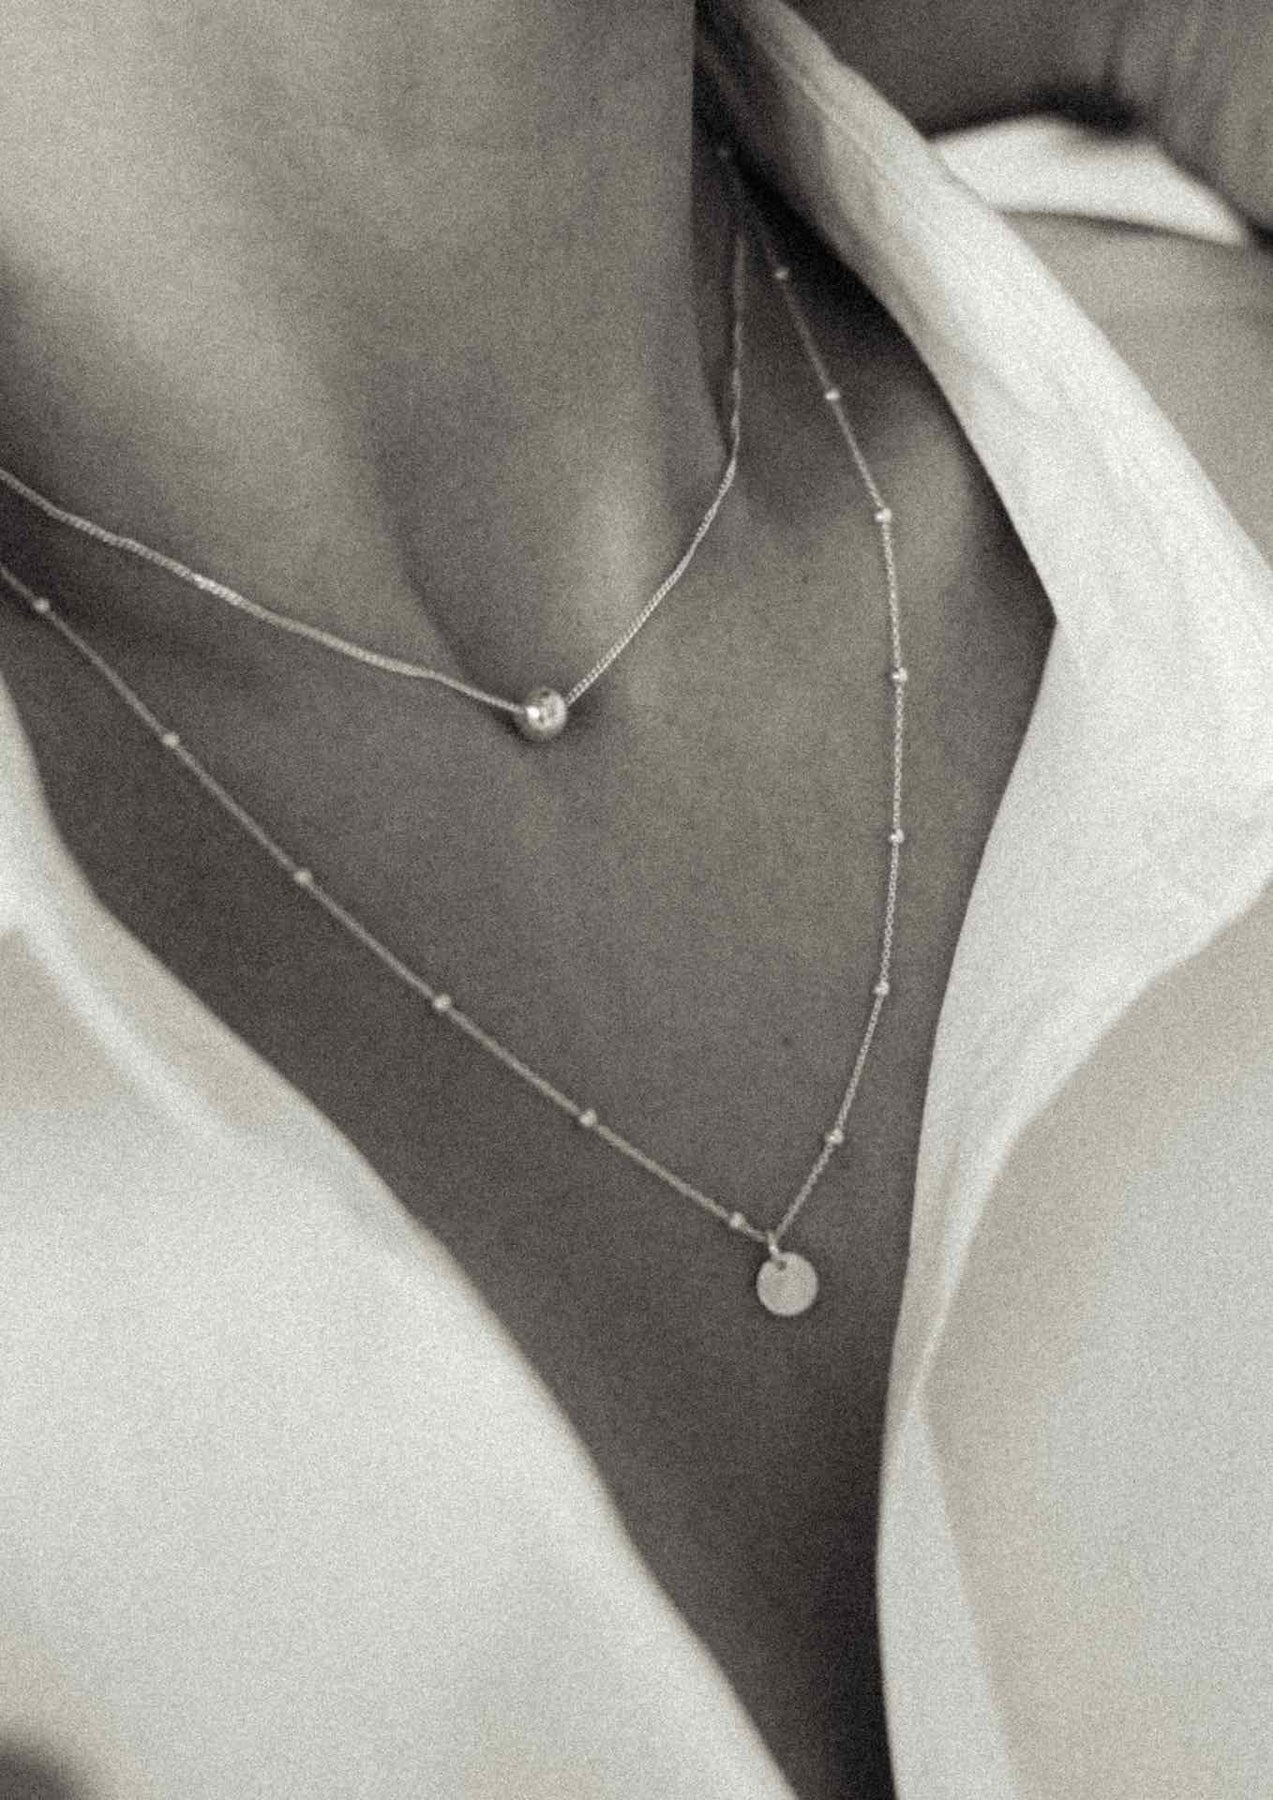 A woman wearing a Bubble Necklace - Silver, a sterling silver accessory with a 40 cm chain and a 6 mm hollow bubble pendant. Hand-made sustainably by NO MORE in Lithuania.